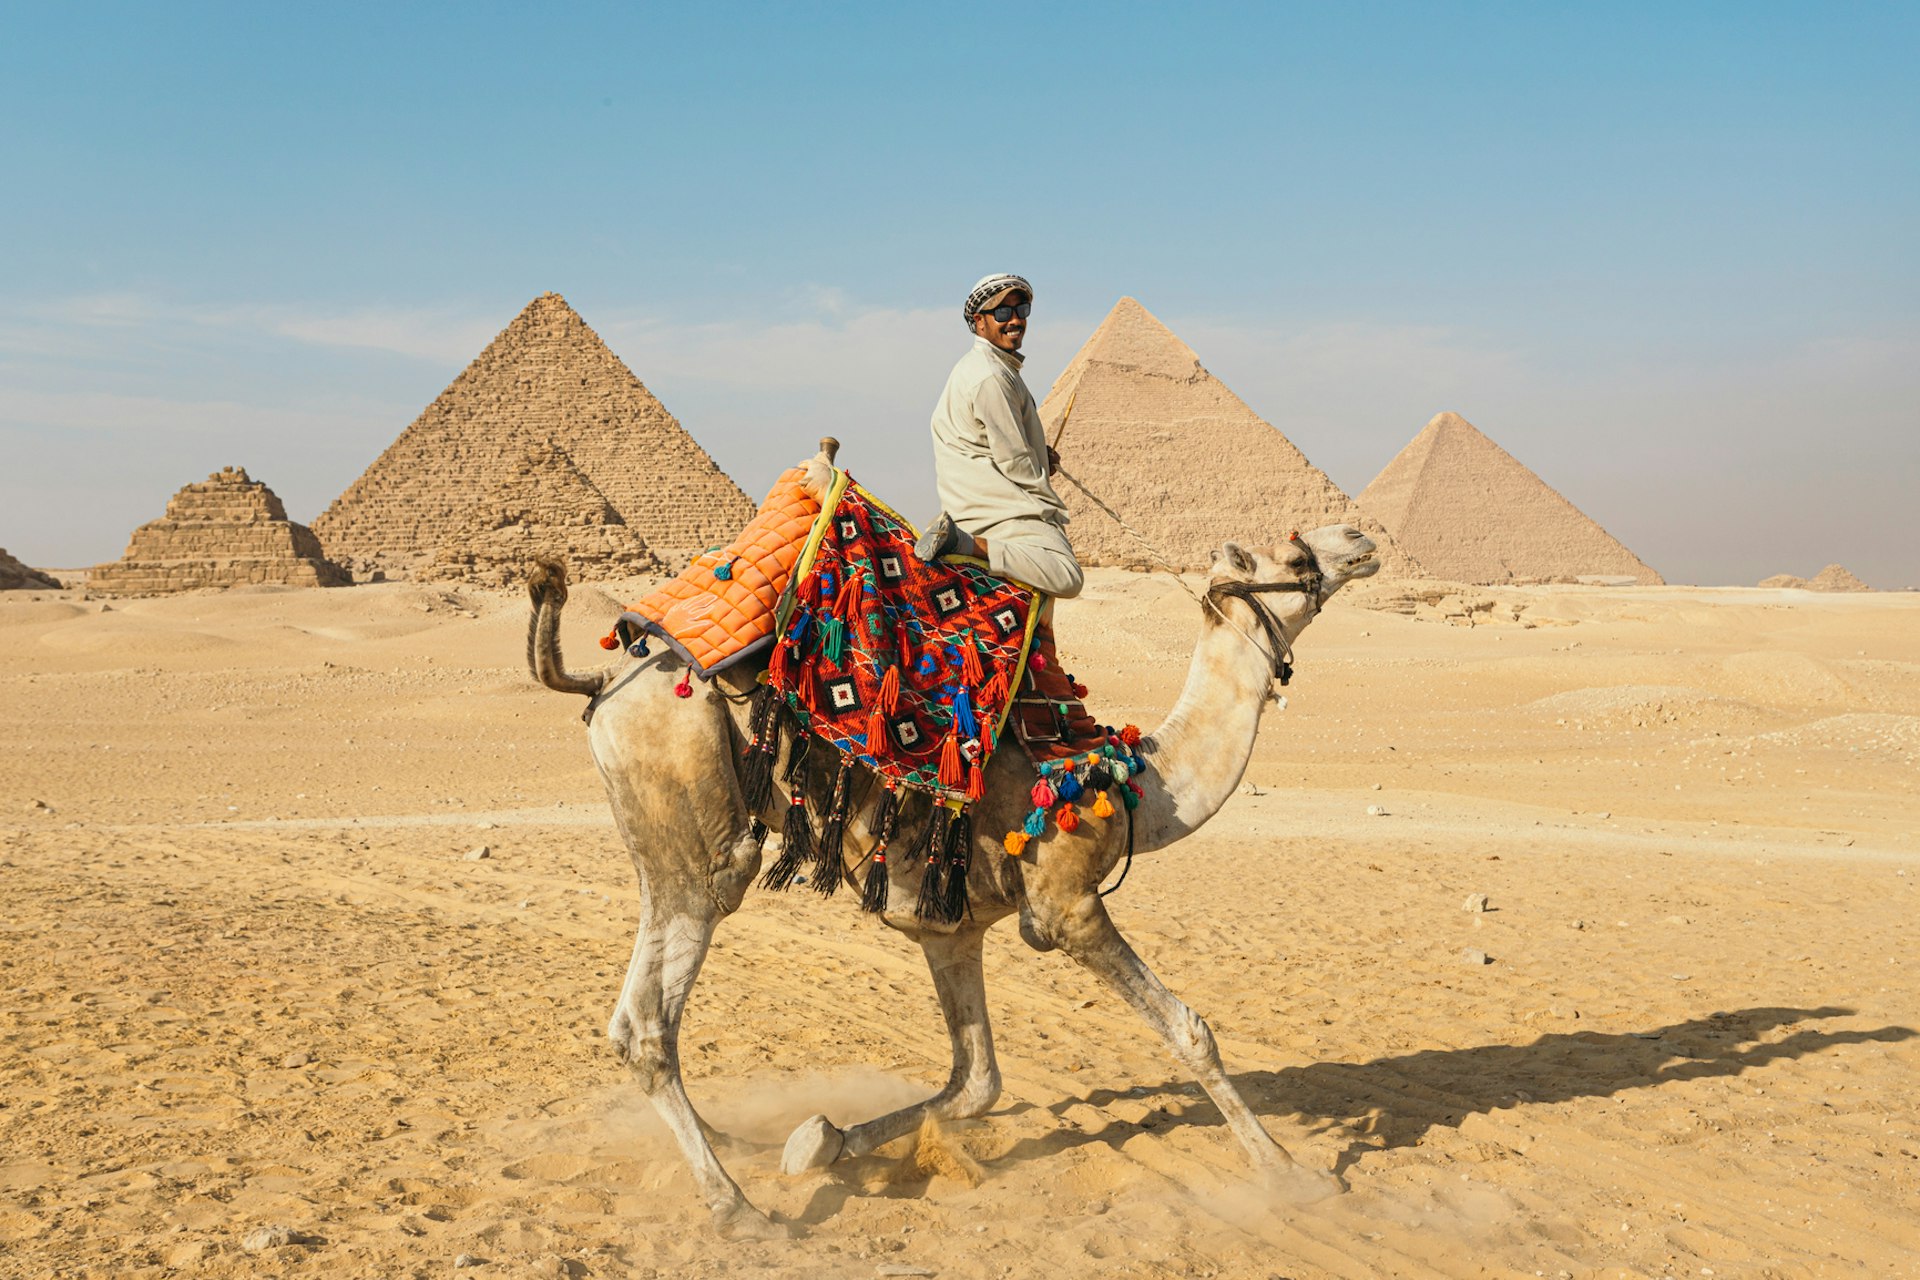 A camel driver in front of the Pyramids of Giza, Egypt